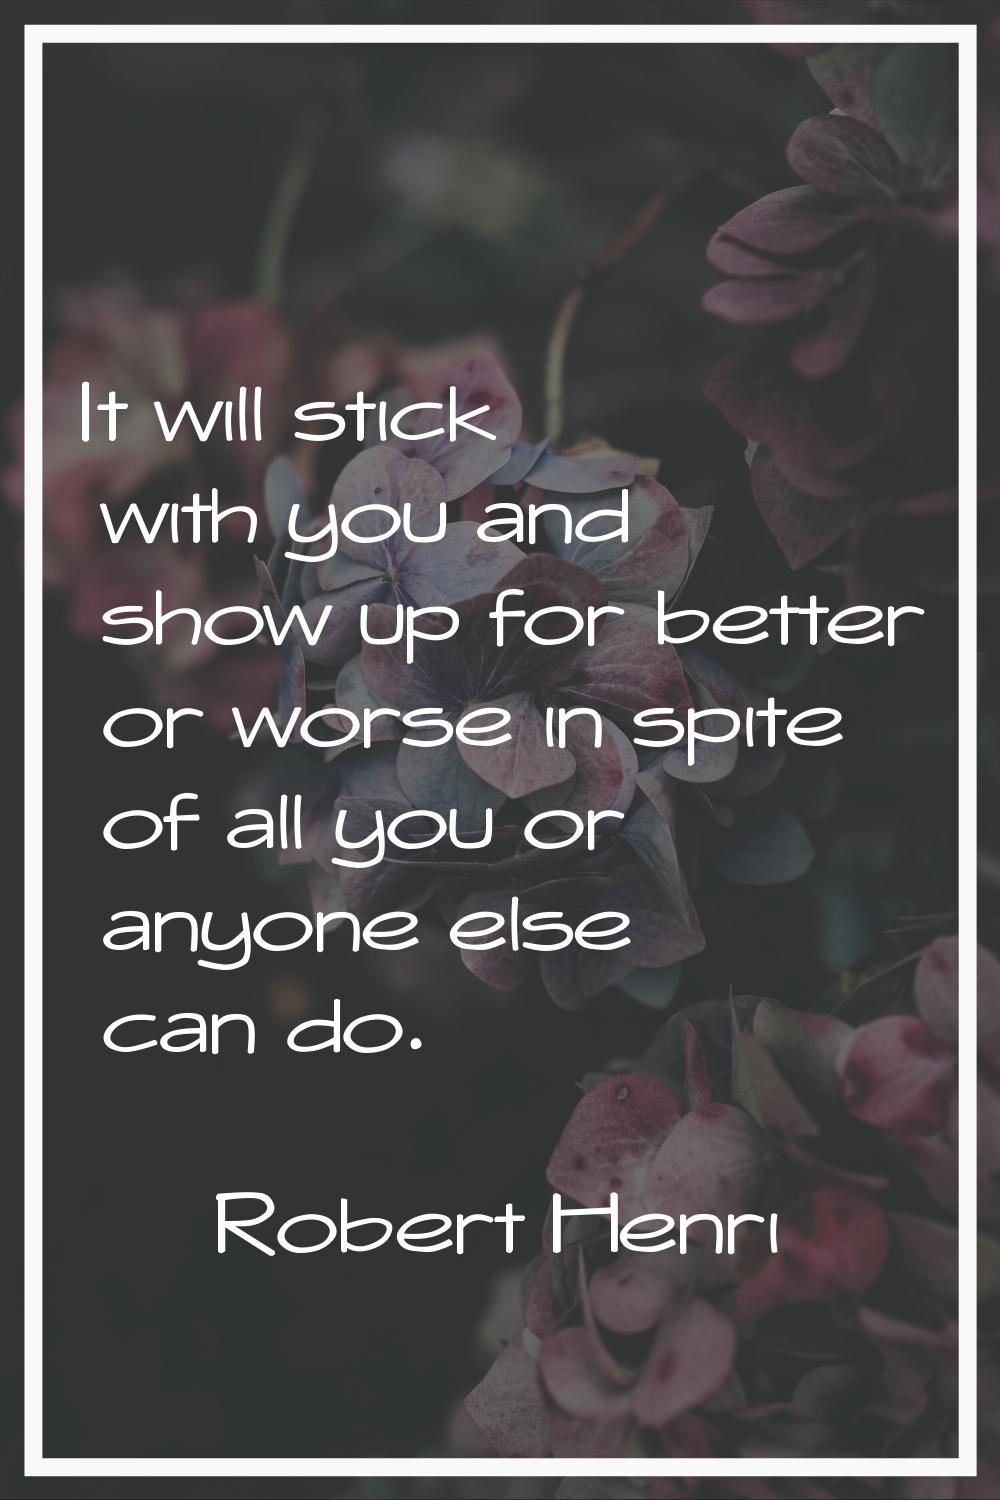 It will stick with you and show up for better or worse in spite of all you or anyone else can do.